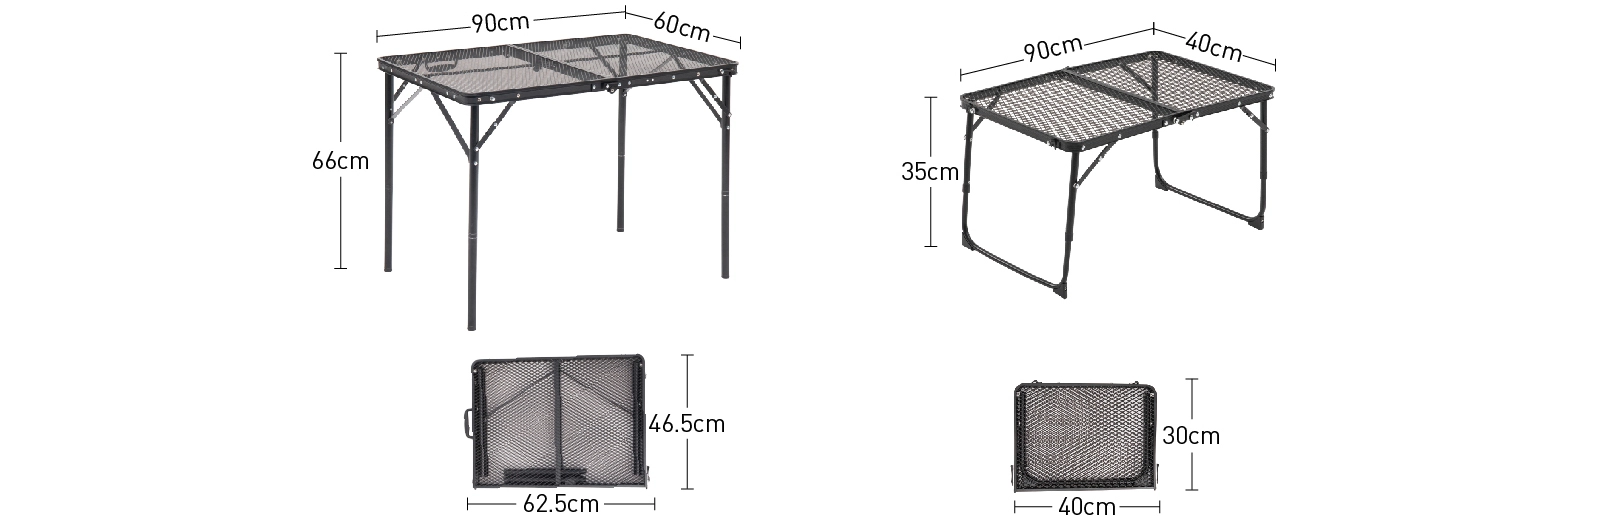 details of Ultralight Portable Travel Camping Iron Mesh Table